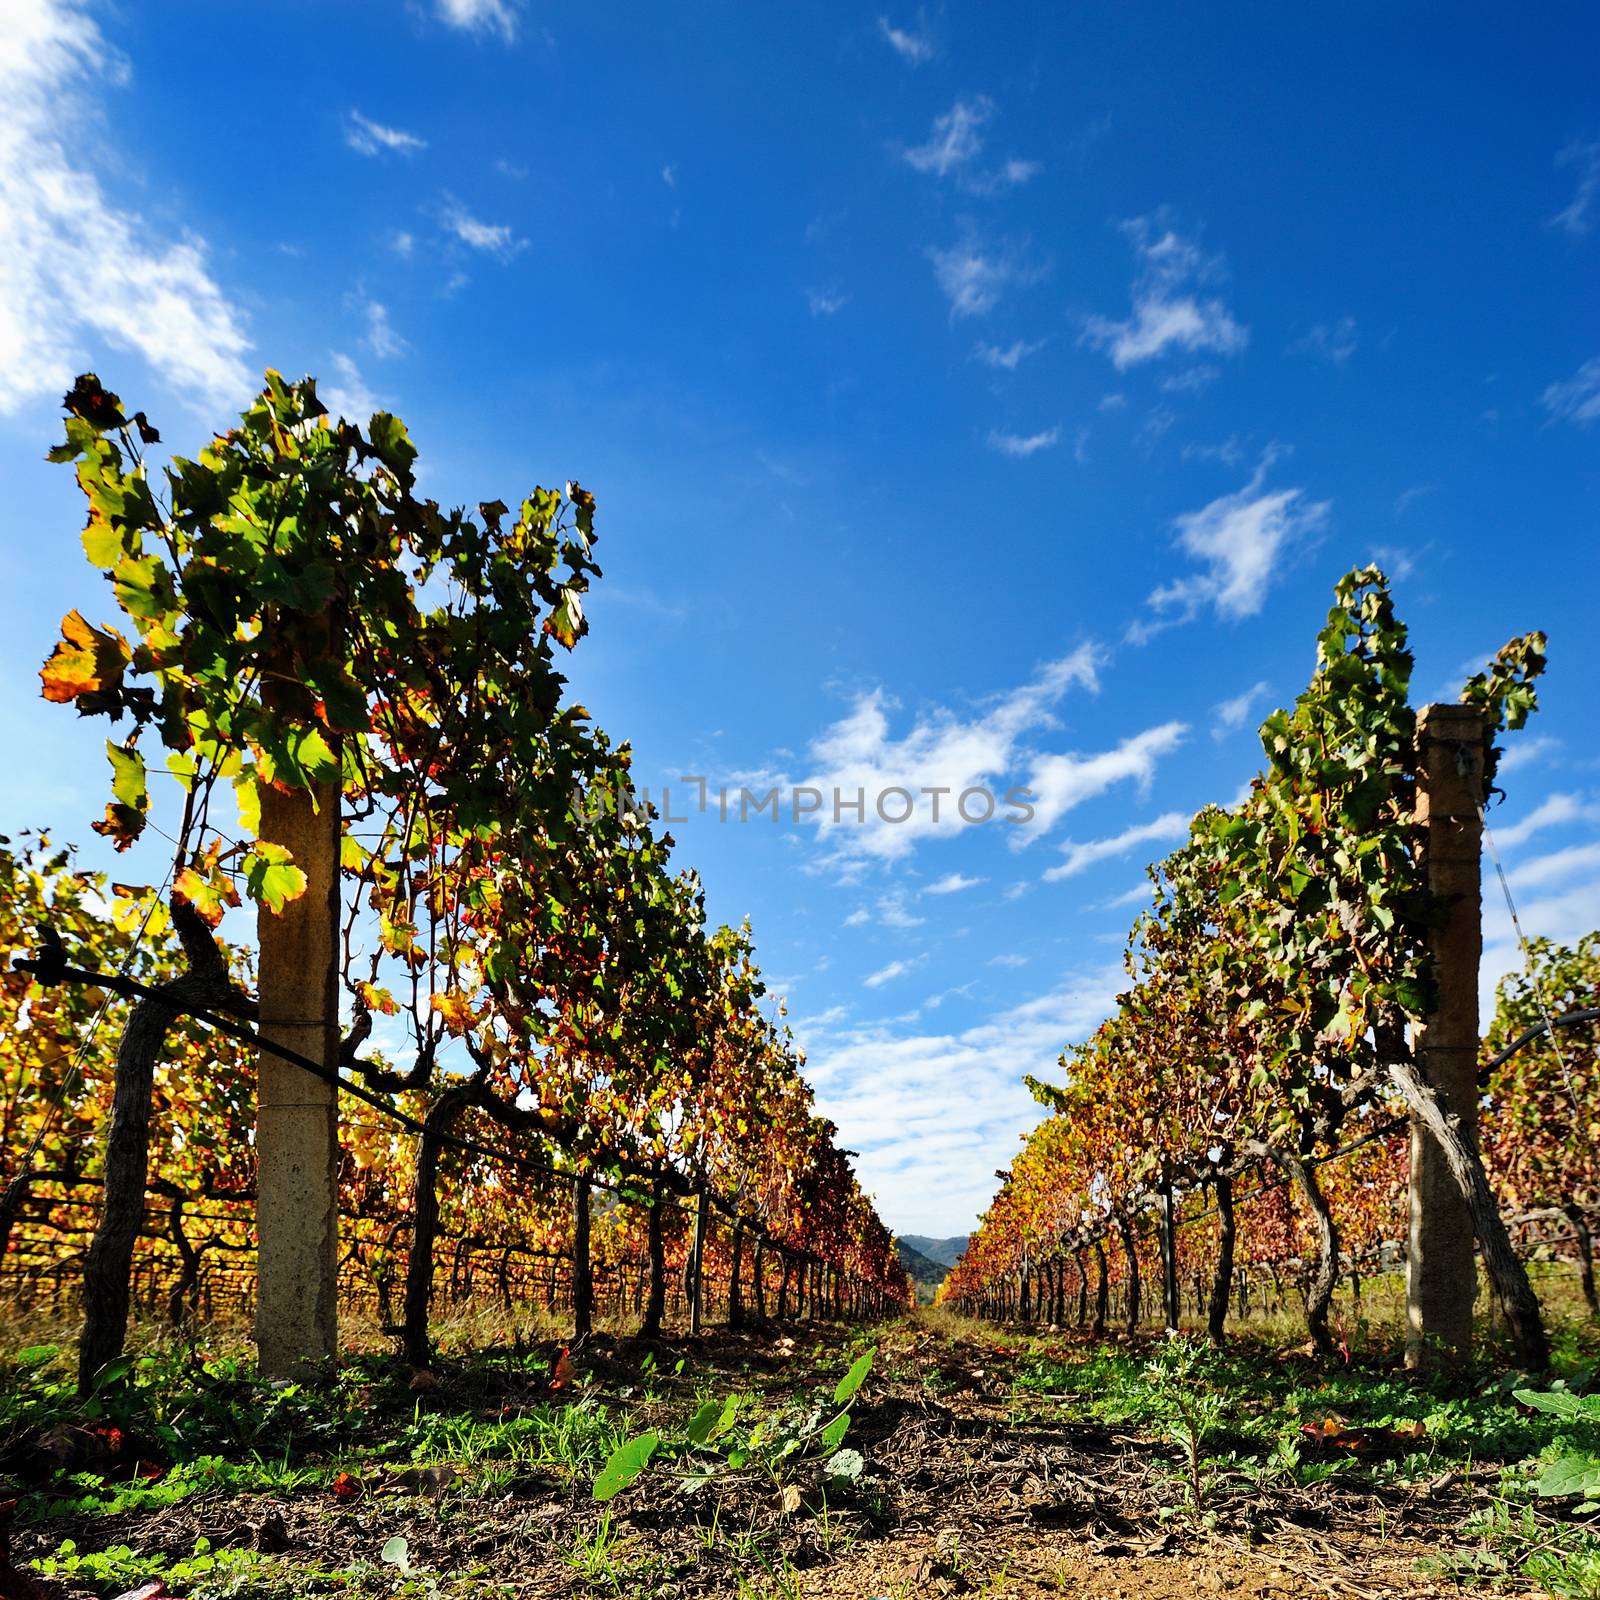 Details of vineyards, rows of vines young and old with the colors of autumn.